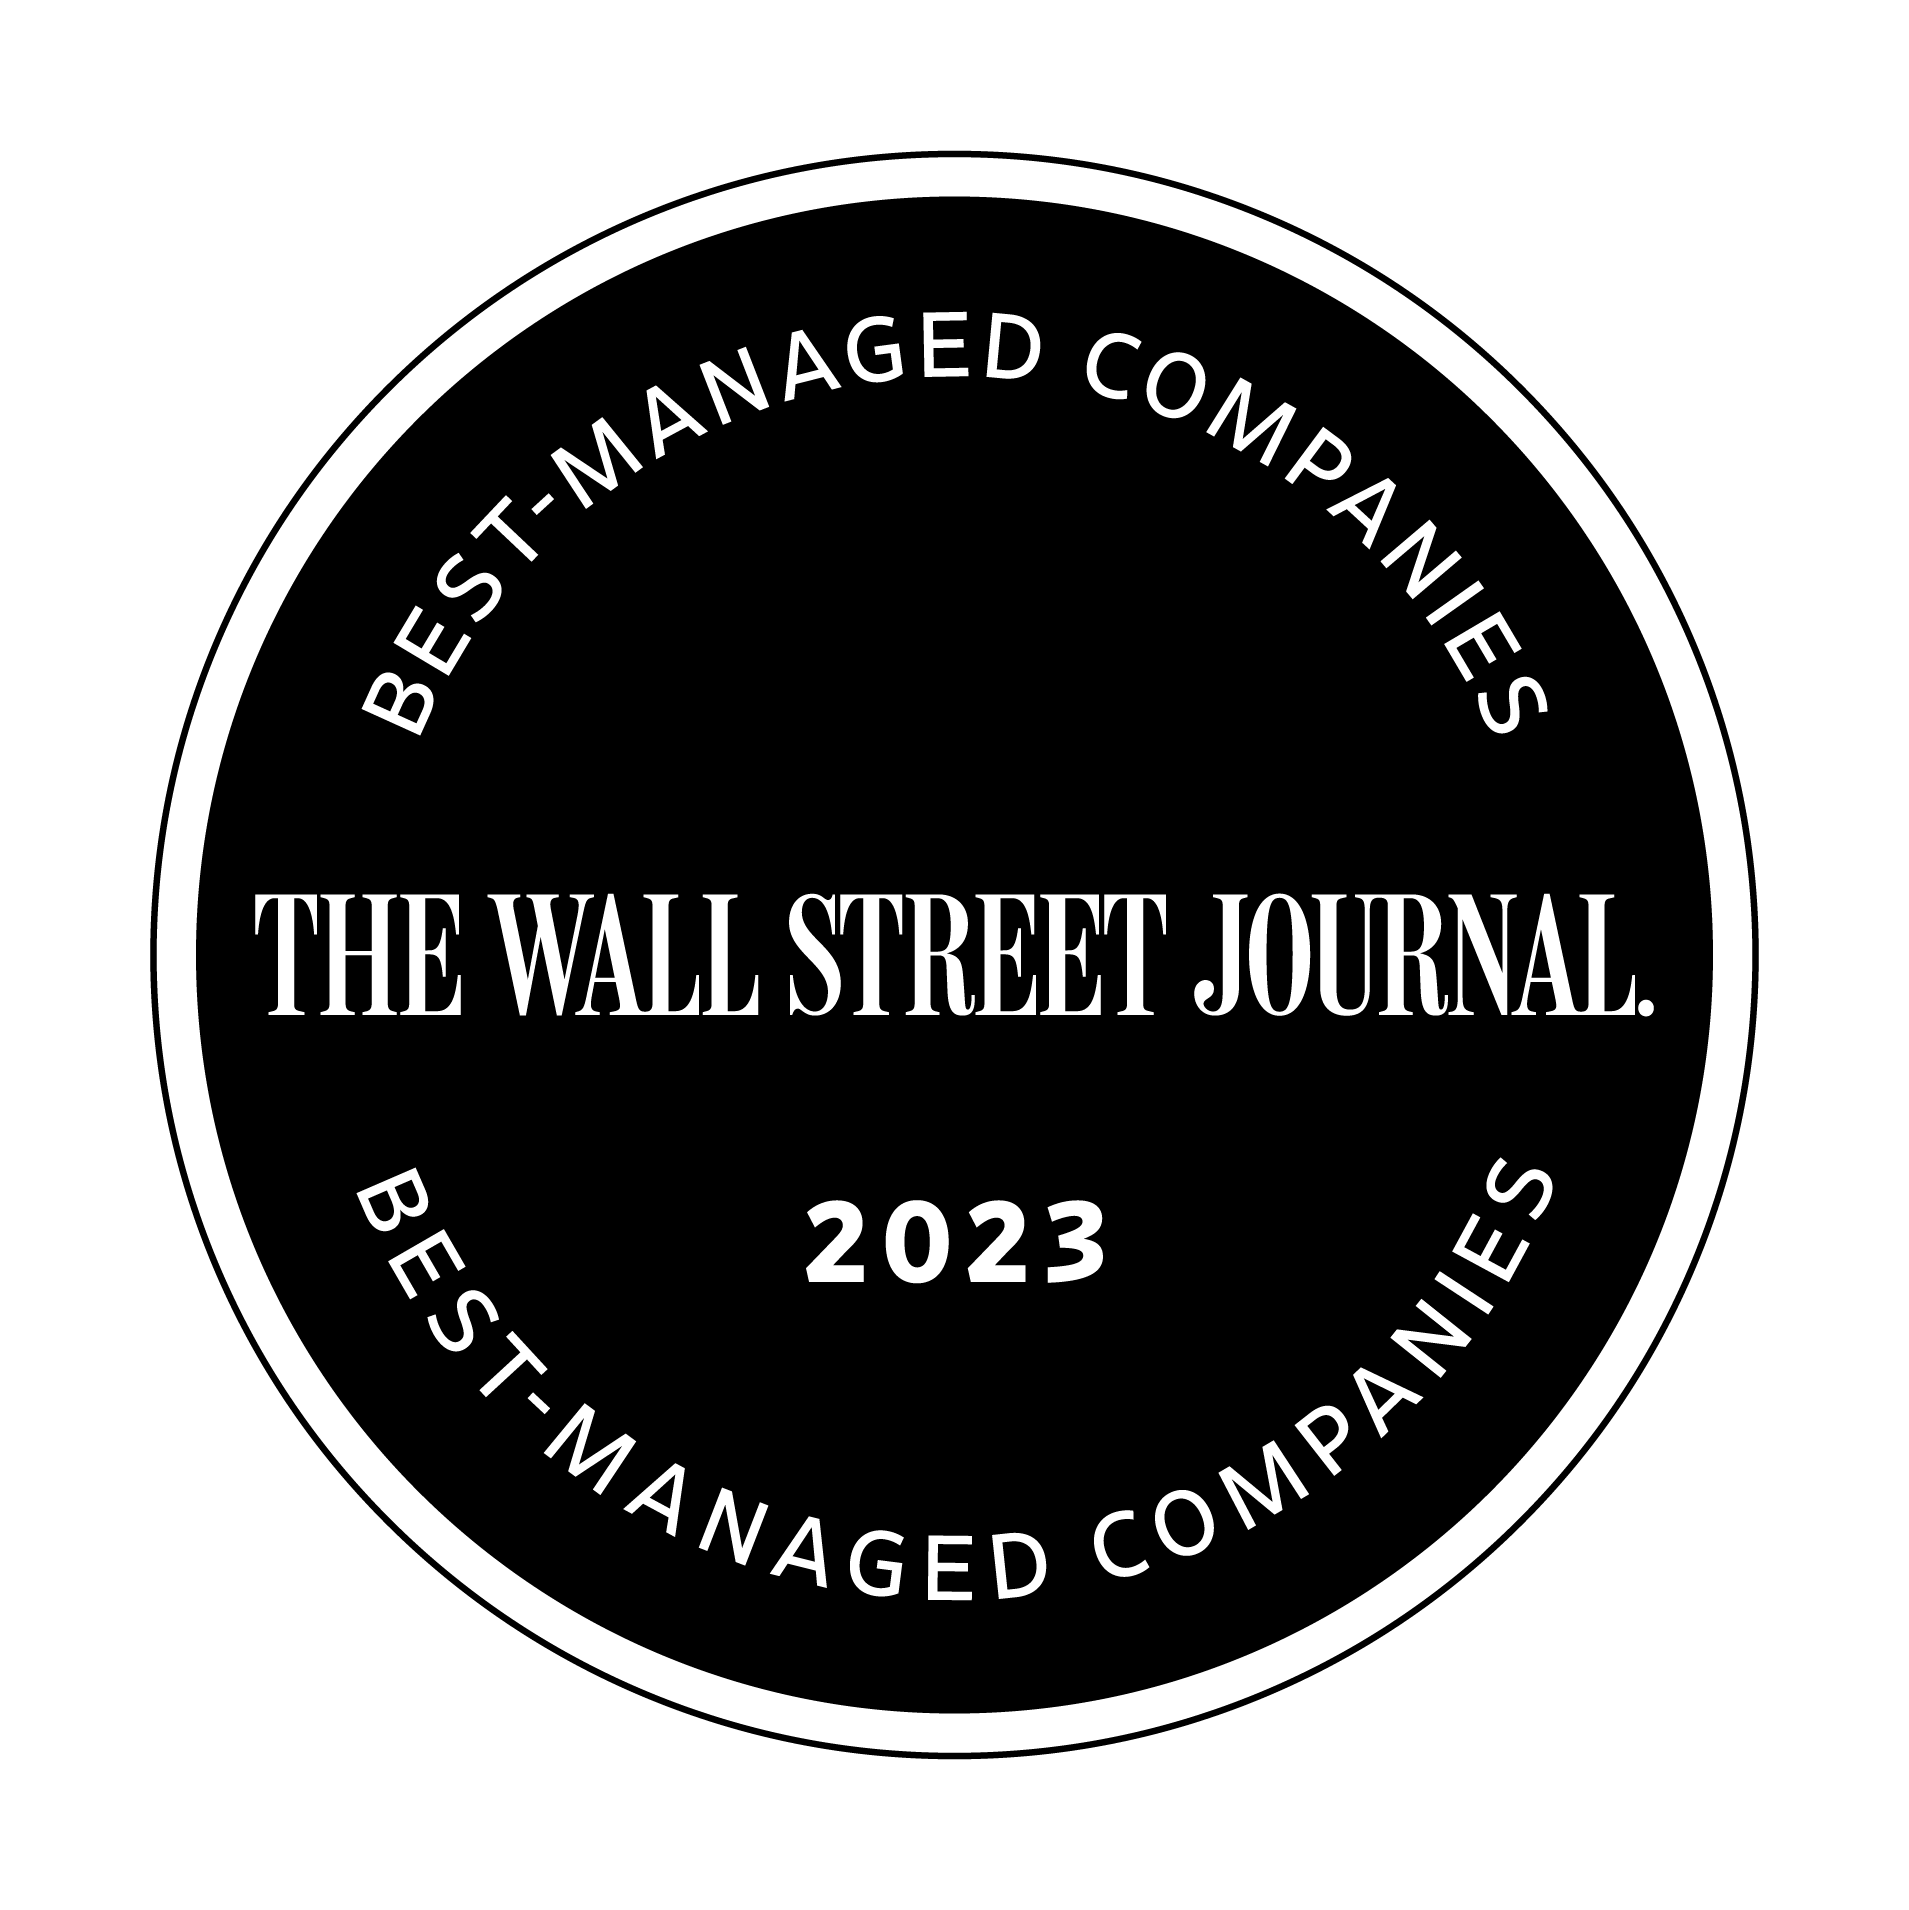 Ameriprise’s recognition as a The Wall Street Journal Management Top 250 list for 2023